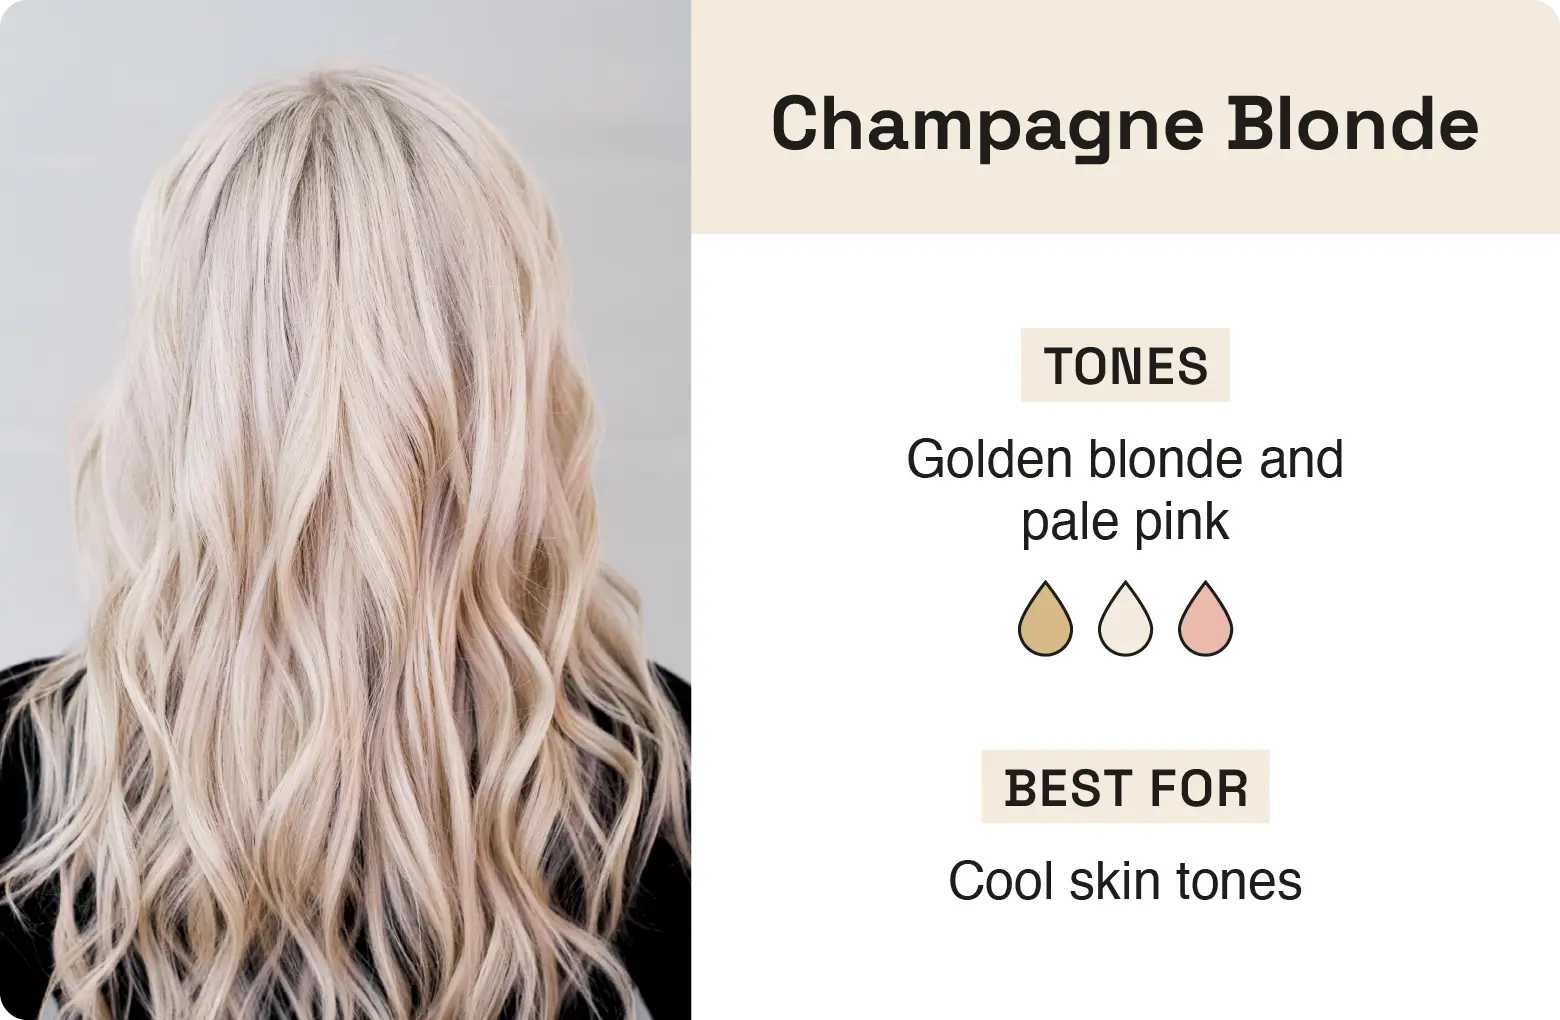 Graphic explaining champagne blonde hair and what skin tones it’s best for. 